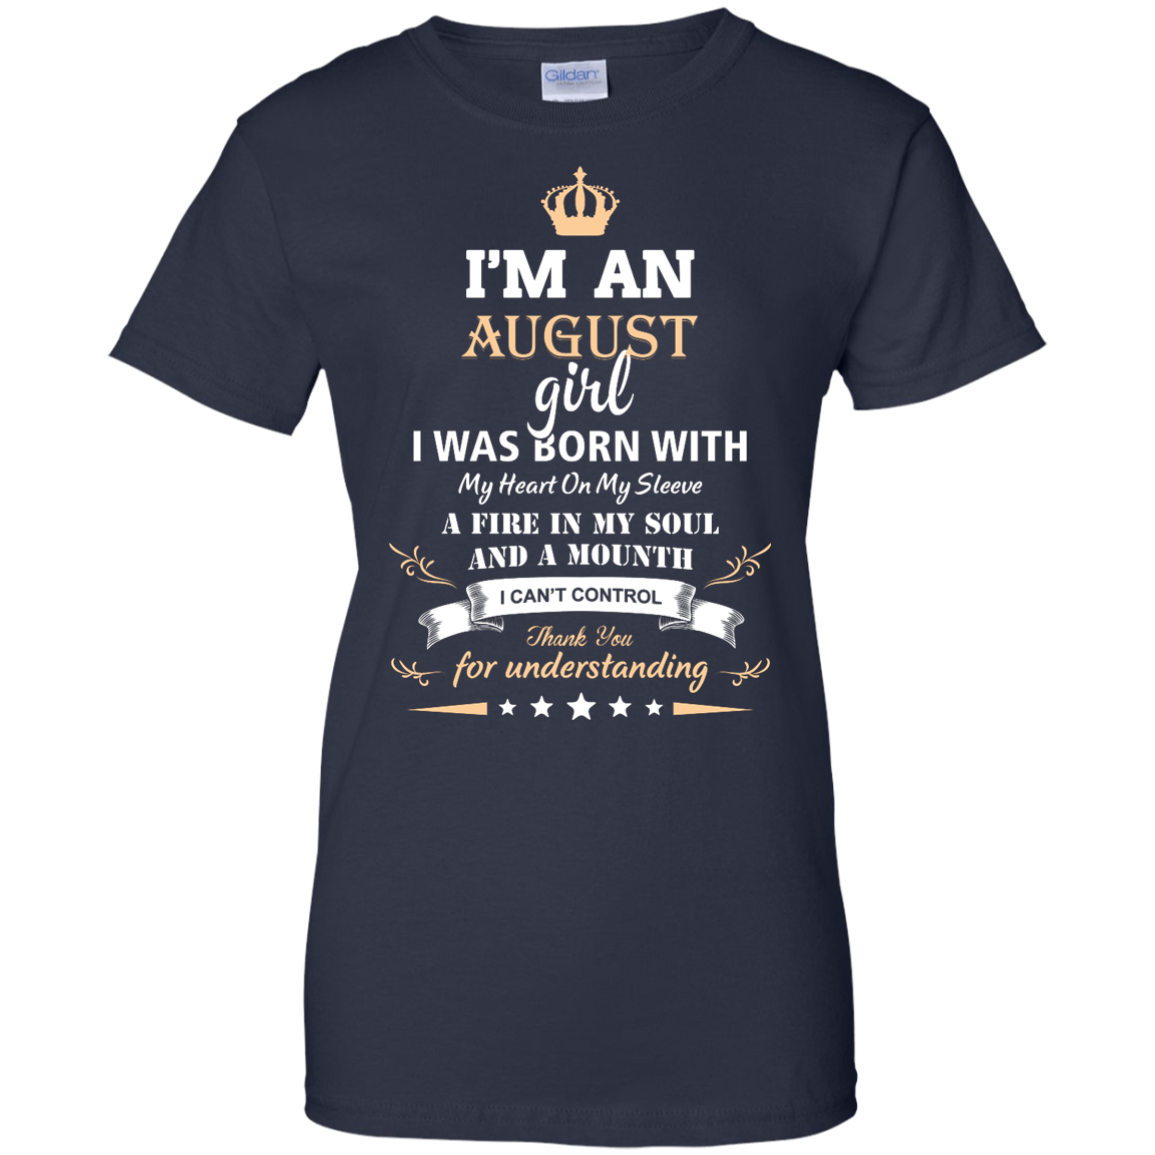 Im an August girl shirts - I was born with my heart on my sleeve a fine ...